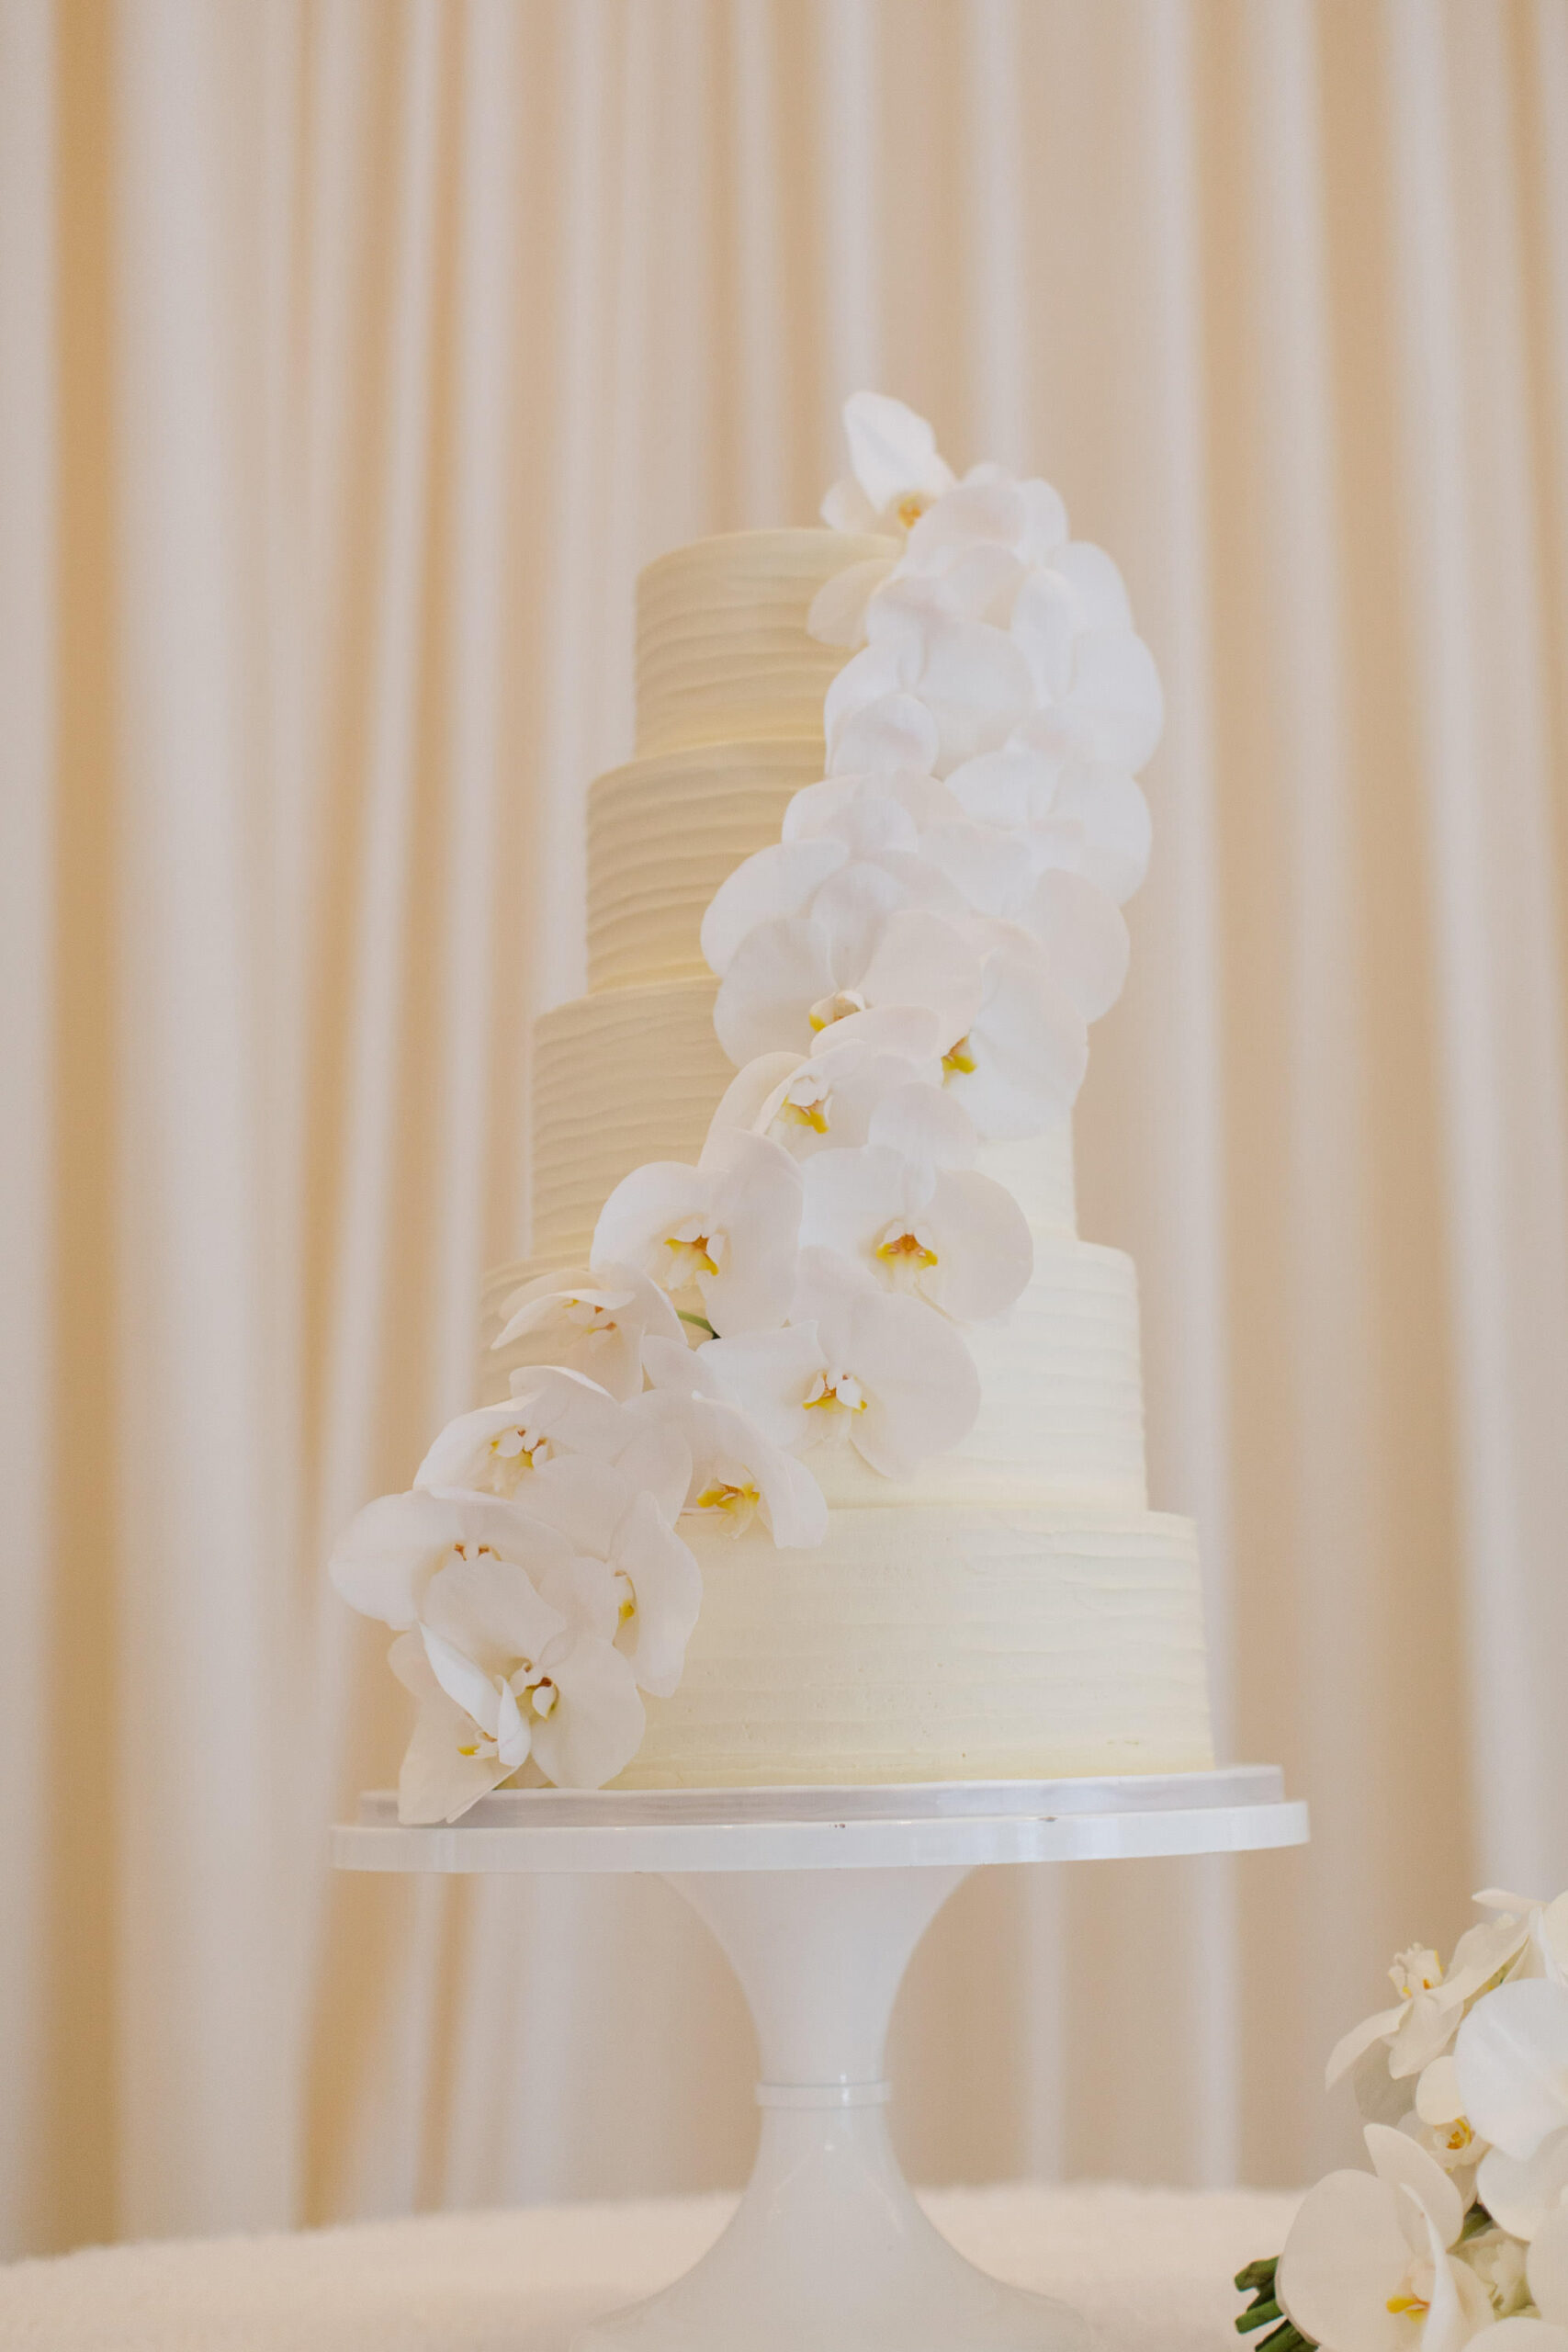 Timeless Classic Wedding Reception, Five Tier Textured White Wedding Cake with Cascading White Orchid Flowers | Tampa Bay Wedding Florist Bruce Wayne Florals